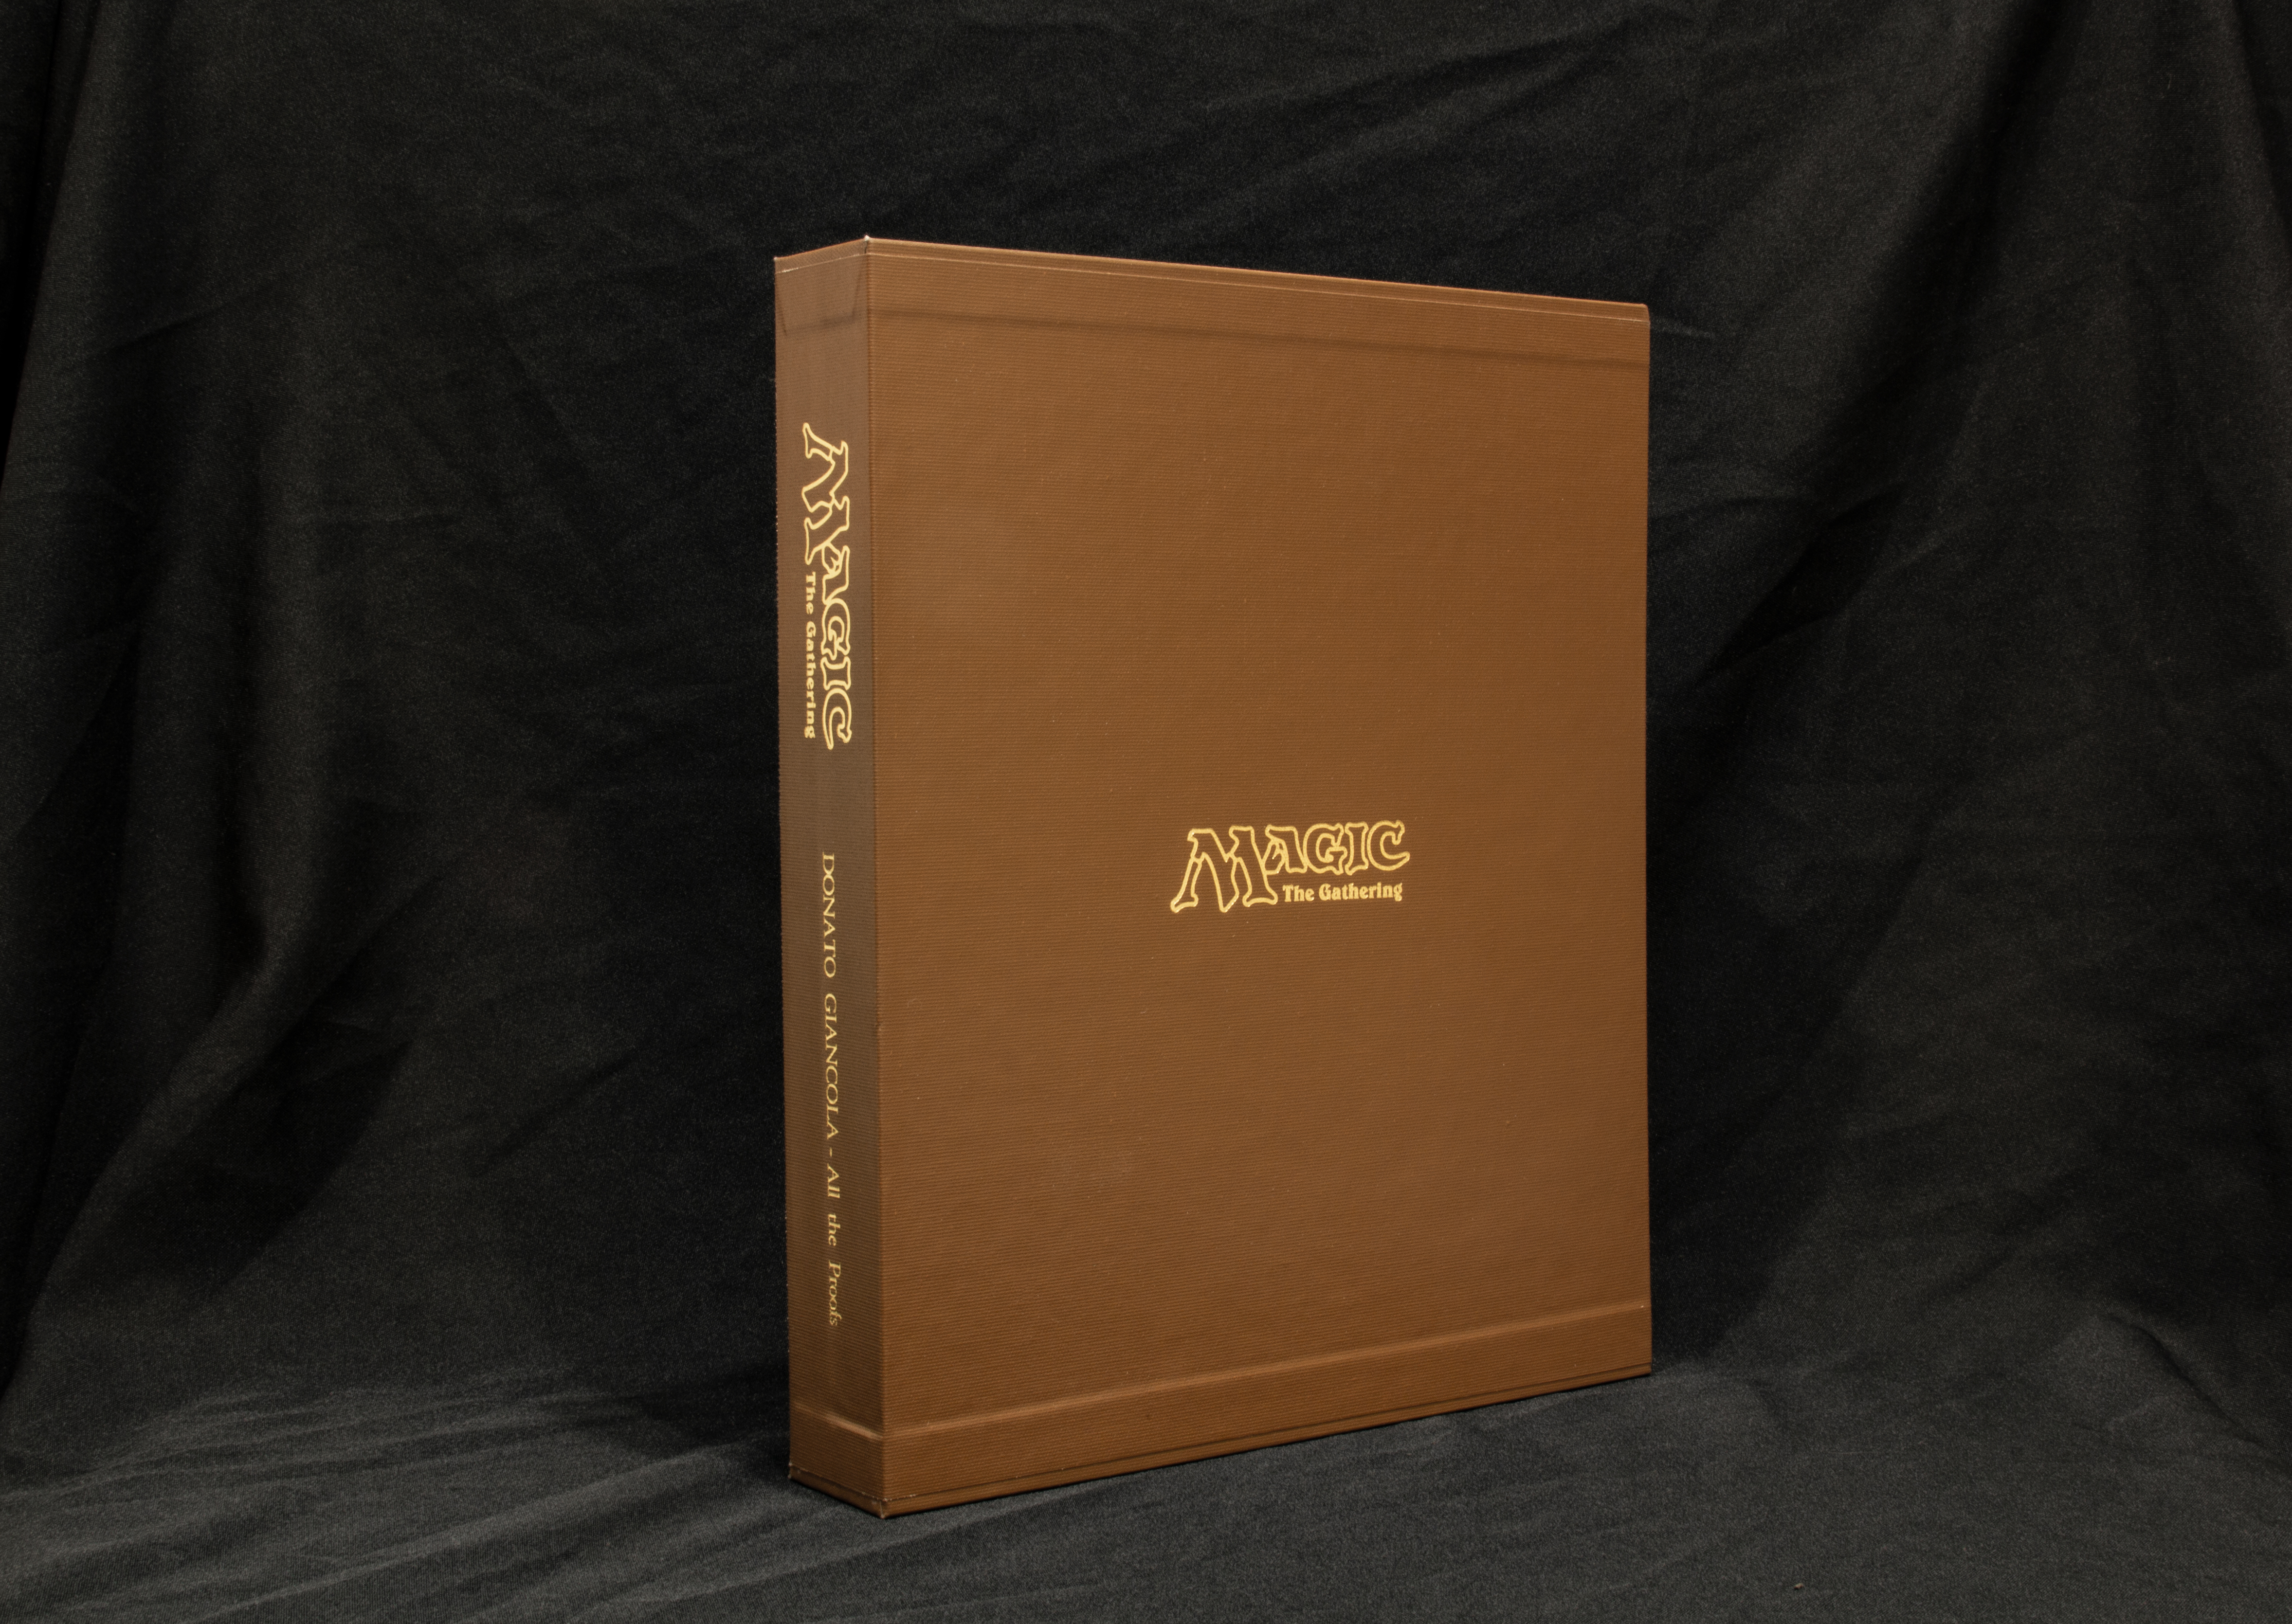 Archival and professionally embossed slipcase
cover for protection of the leather binder and proofs
Tan only